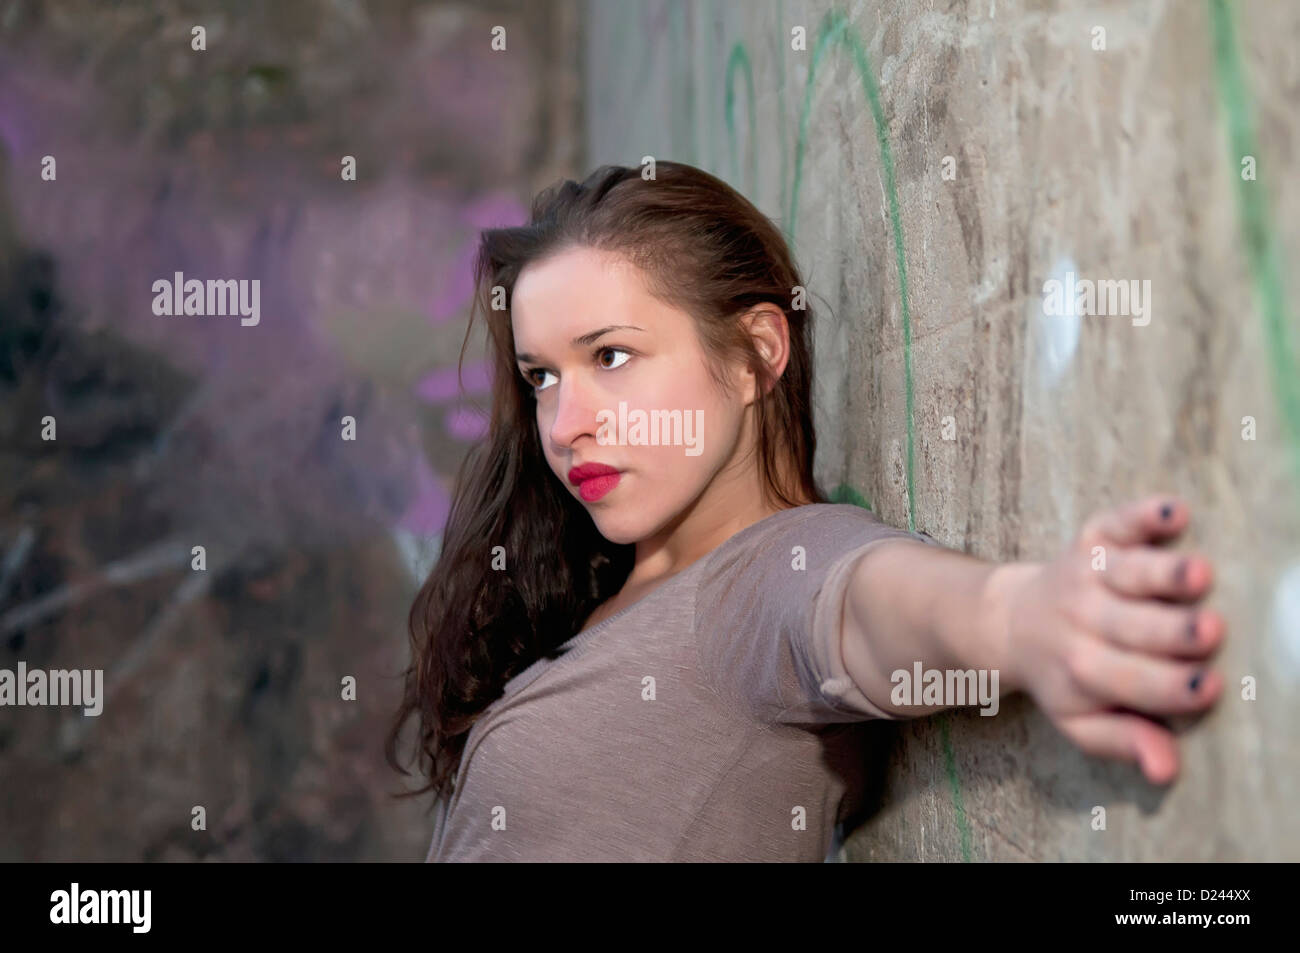 Germany, Young woman with arms outstretched on wall Stock Photo